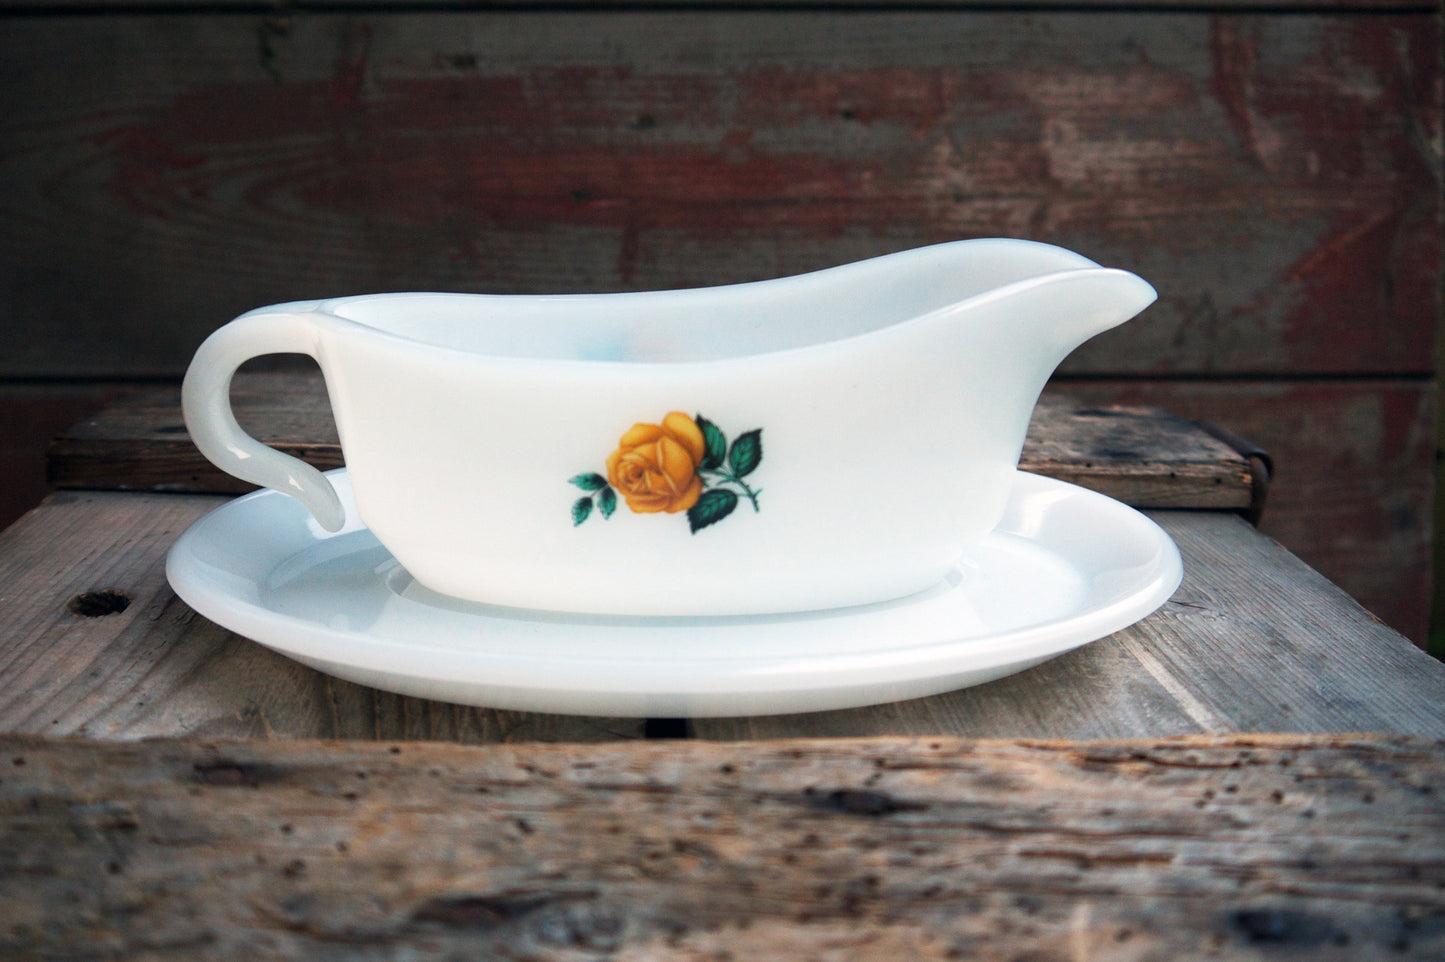 Vintage retro 1960s white Phoenix Opalware Yellow Rose gravy boat jug and saucer by emily rose vintage